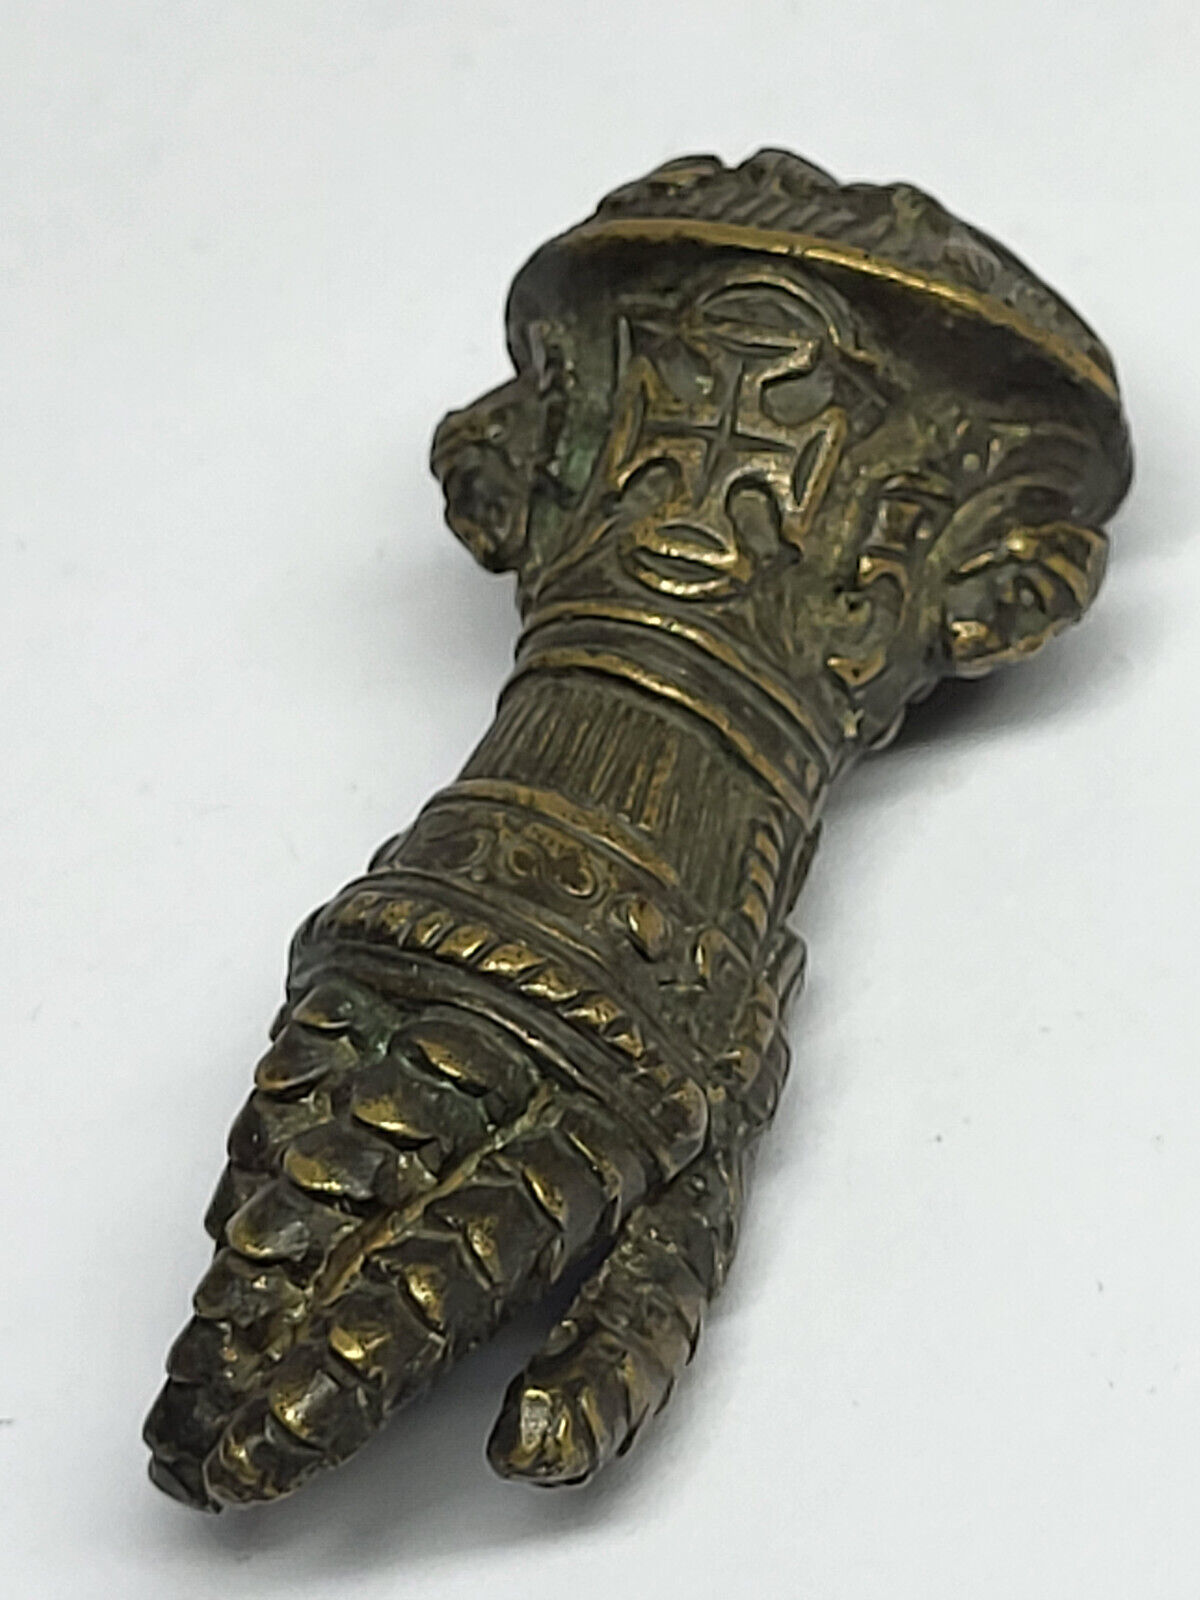 Antique Unusual Bronze MILITARY KNIGHT GLOVE Shaped CANE KNOB HANDLE